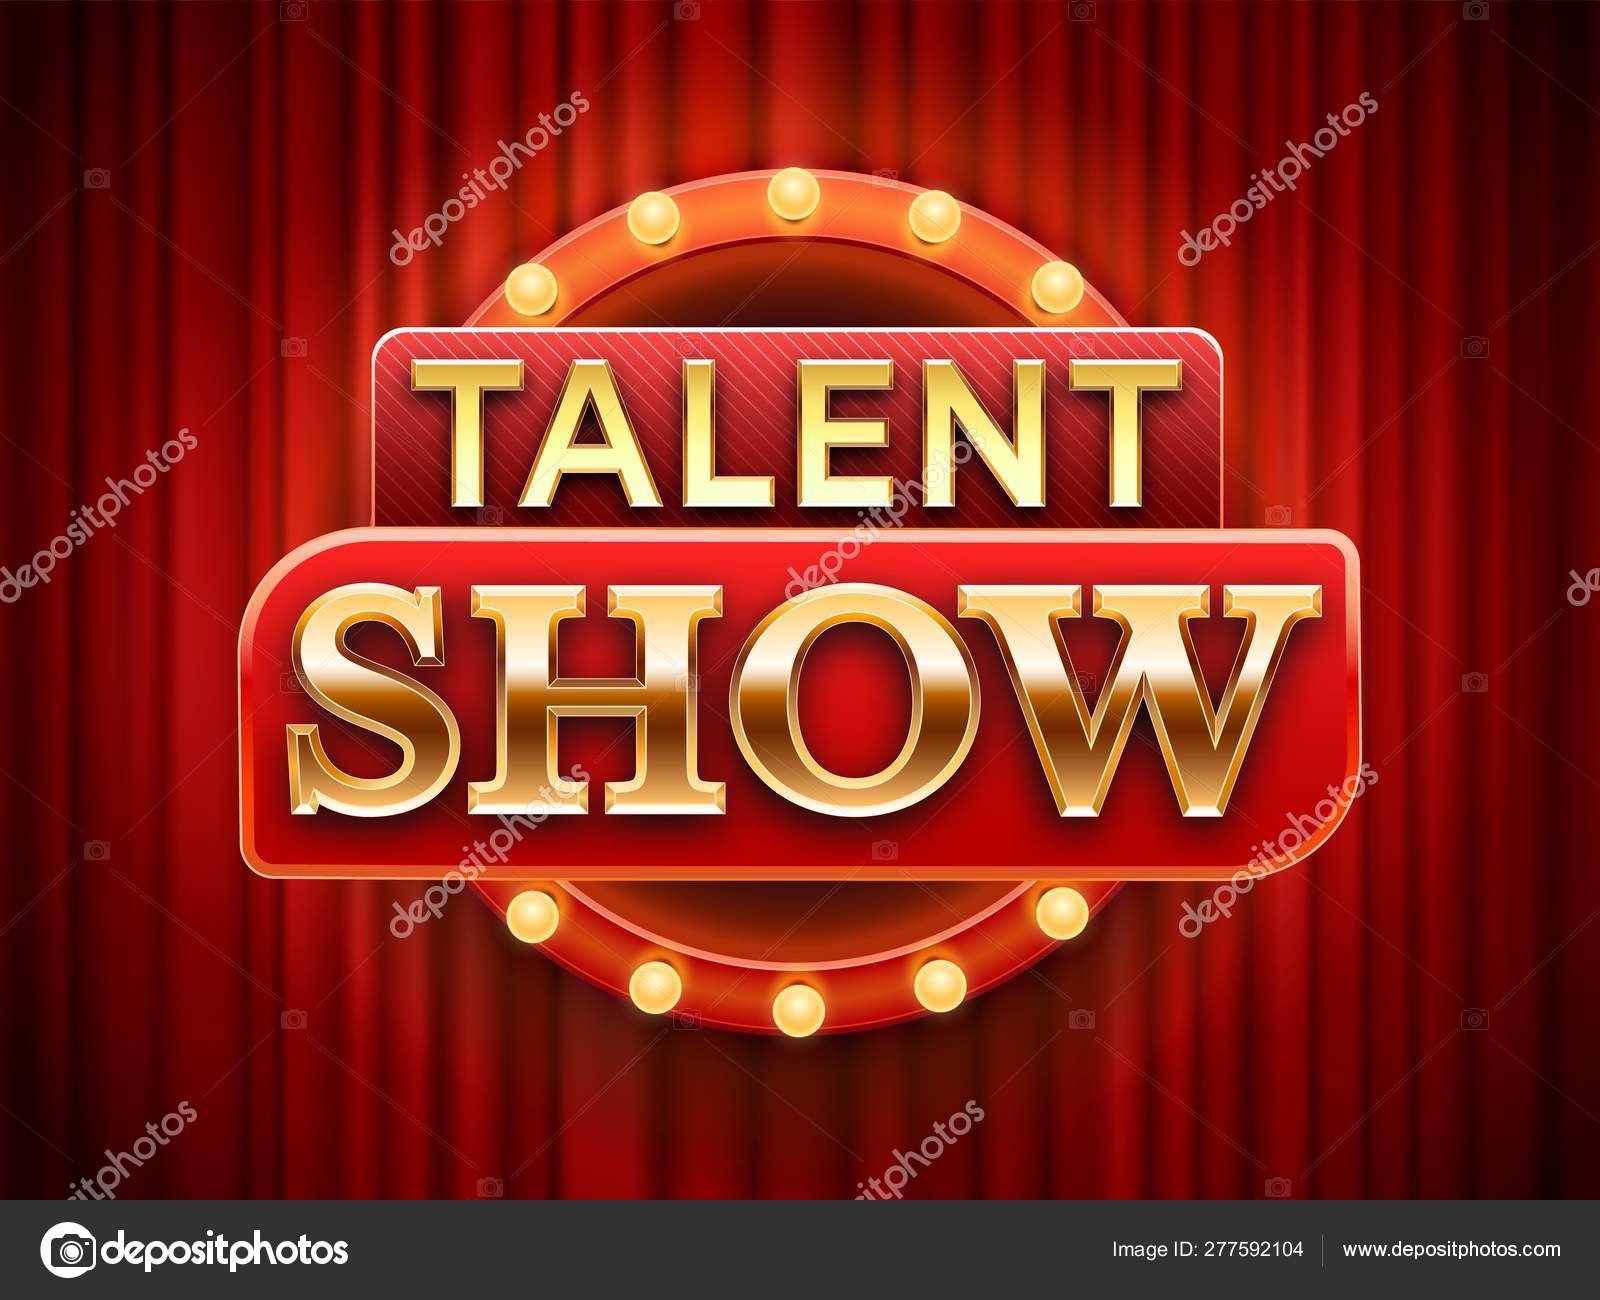 Talent show sign. Talented stage banner, snows scene red curtains With Regard To Talent Show Flyer Template